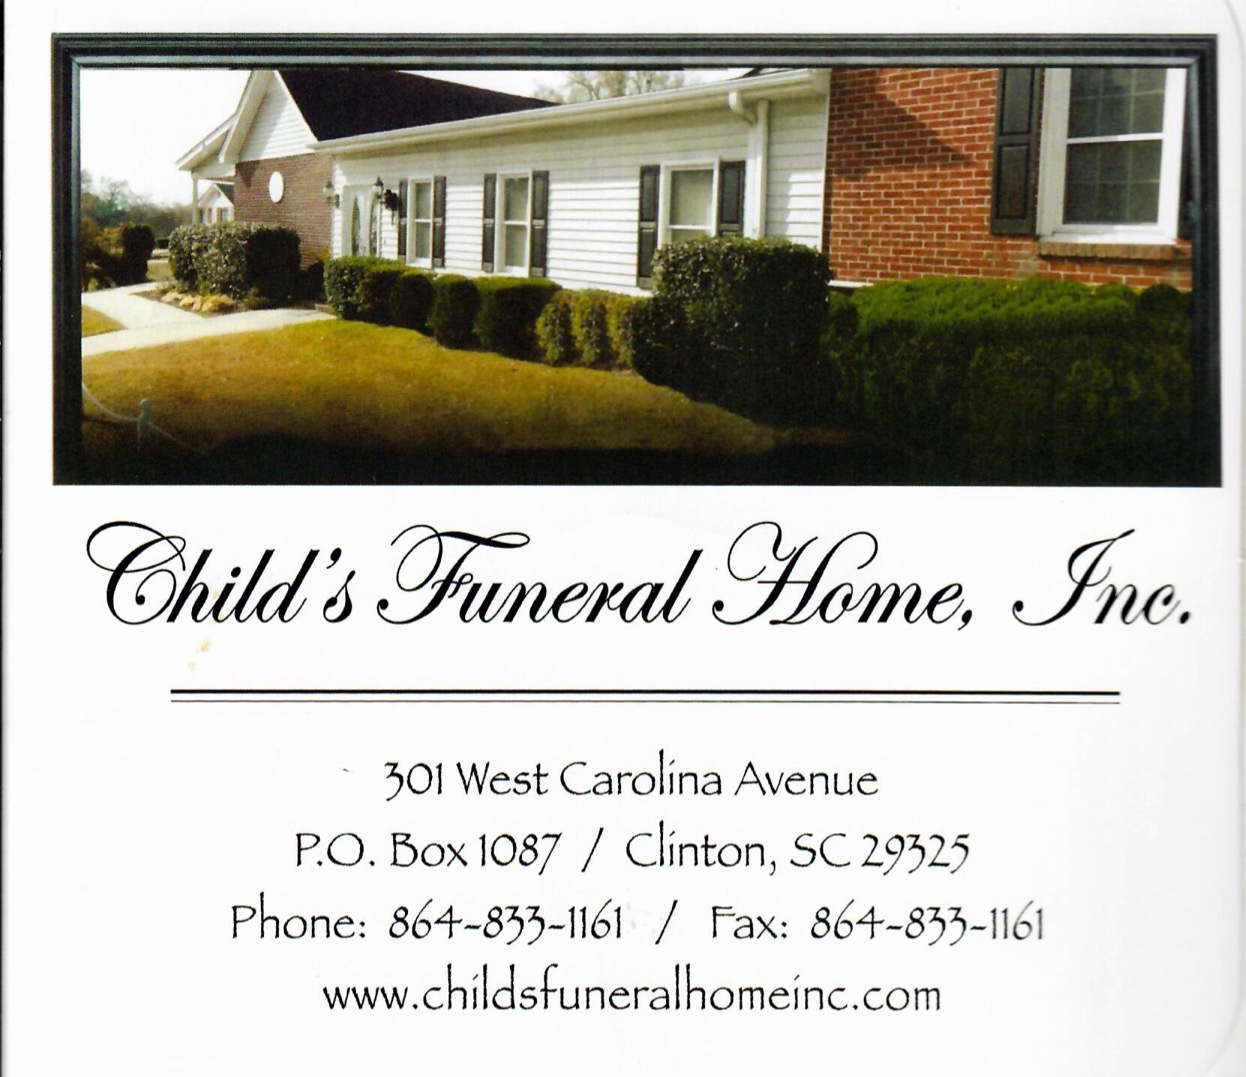 Childs Funeral Home Inc.